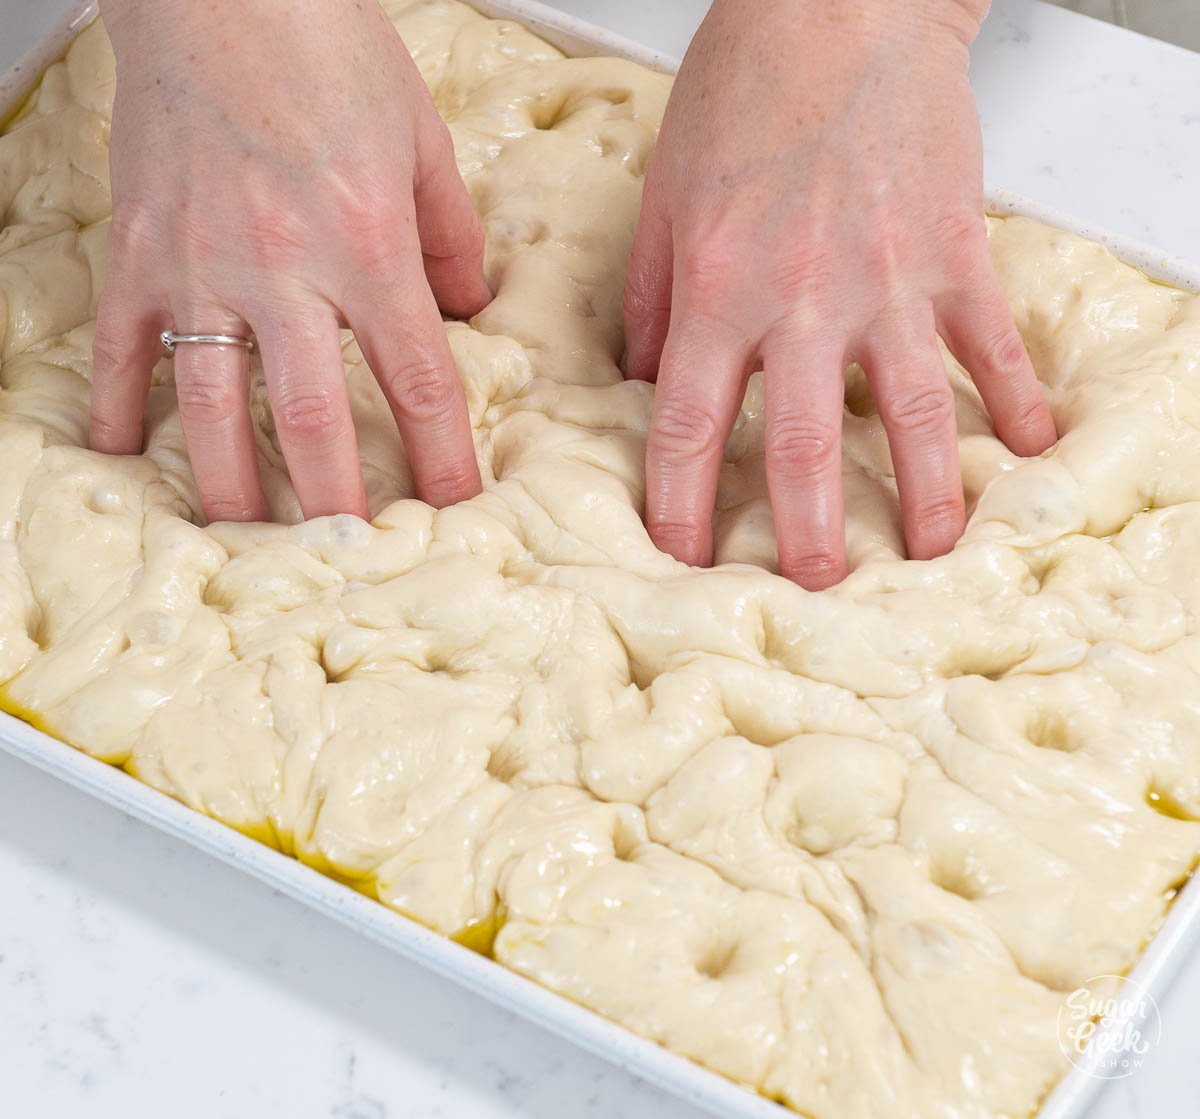 pressing indents into focaccia bread dough with fingertips